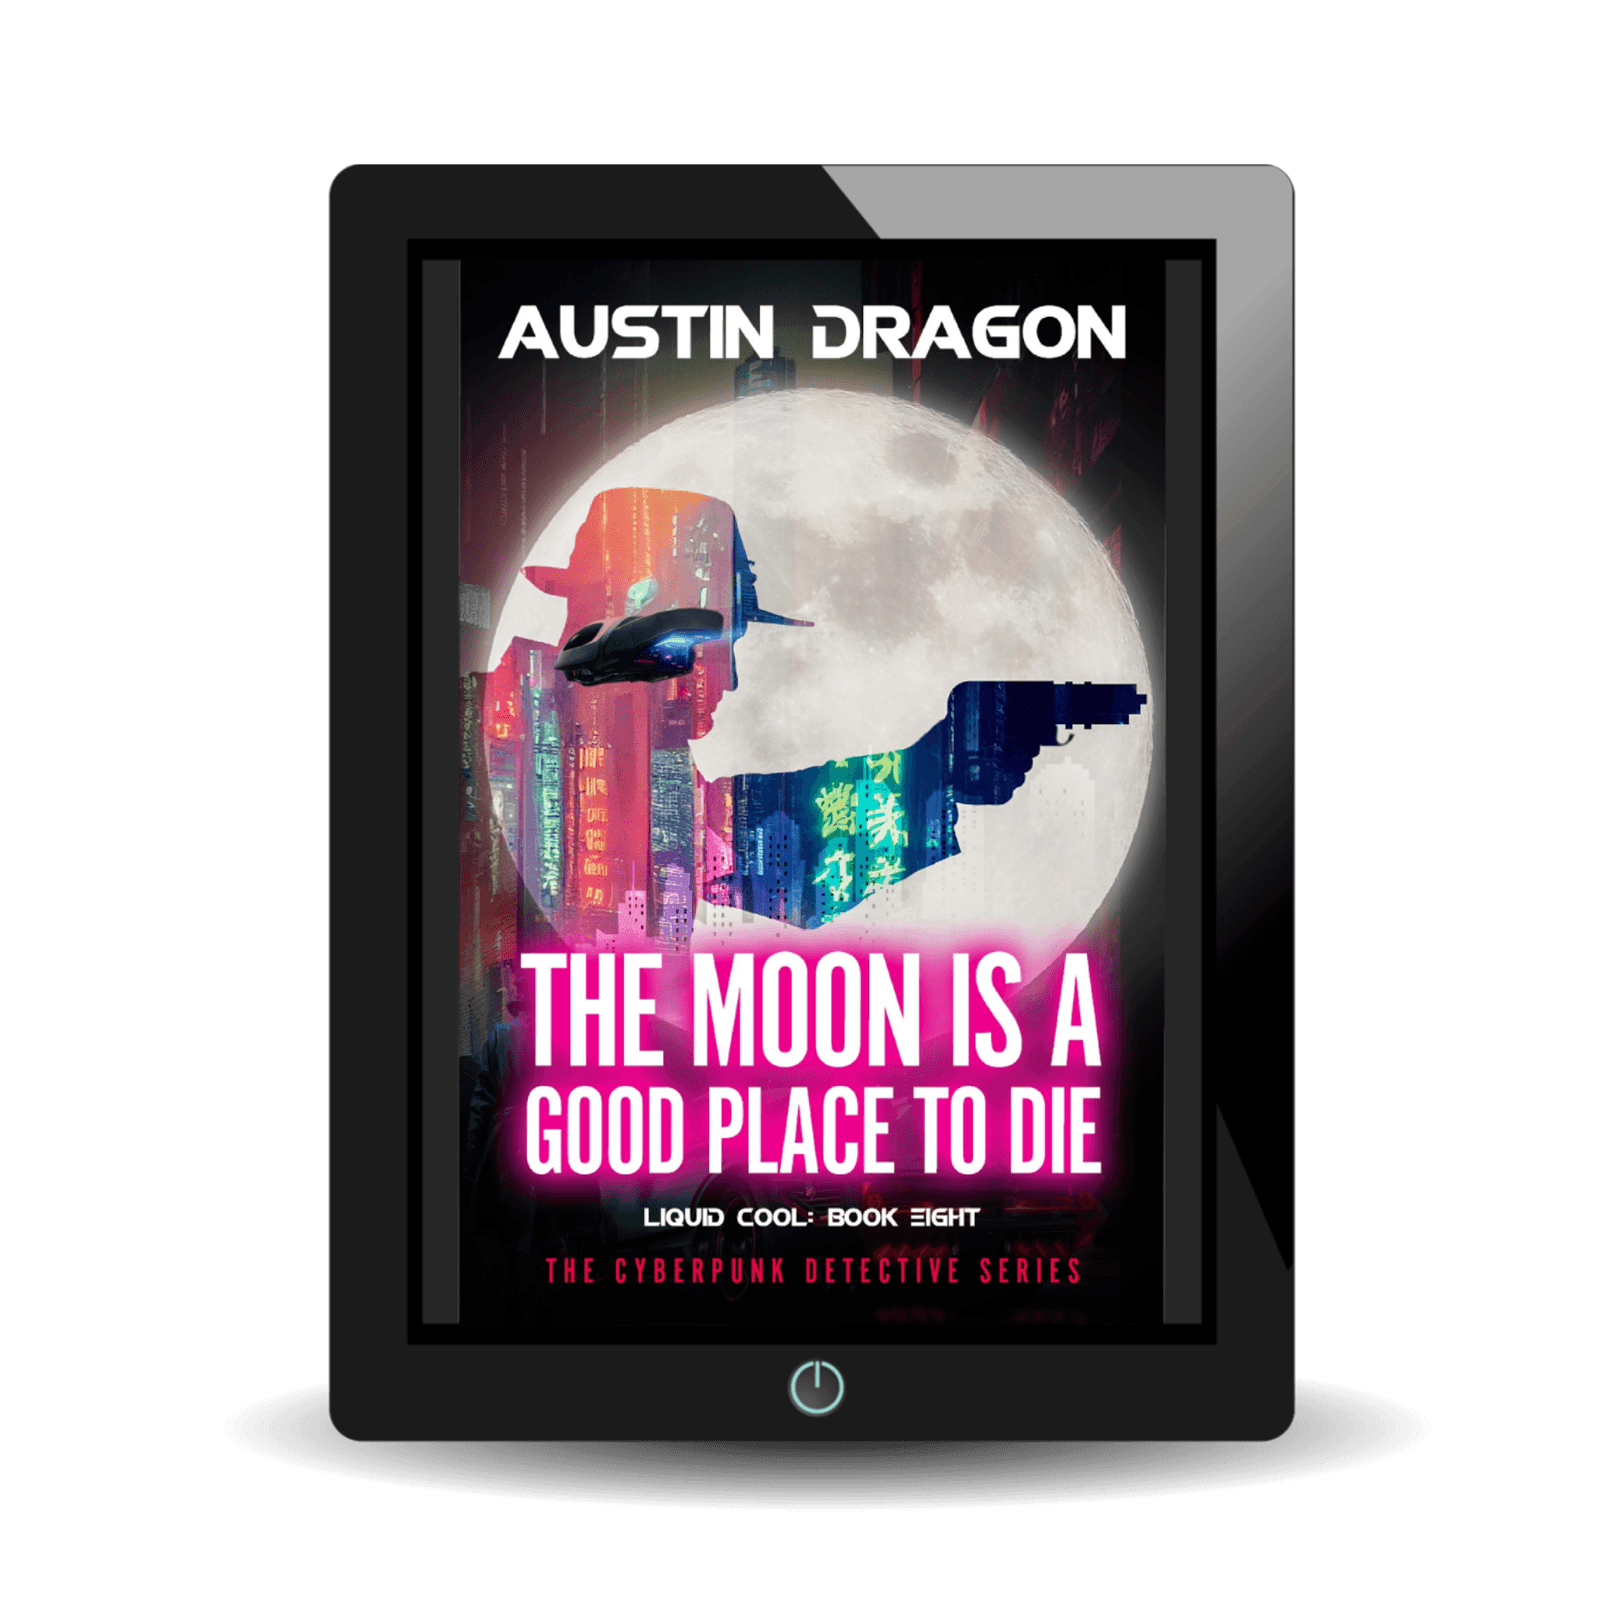 The Moon Is a Good Place to Die (Liquid Cool: The Cyberpunk Detective Series, Book 8) Ebook